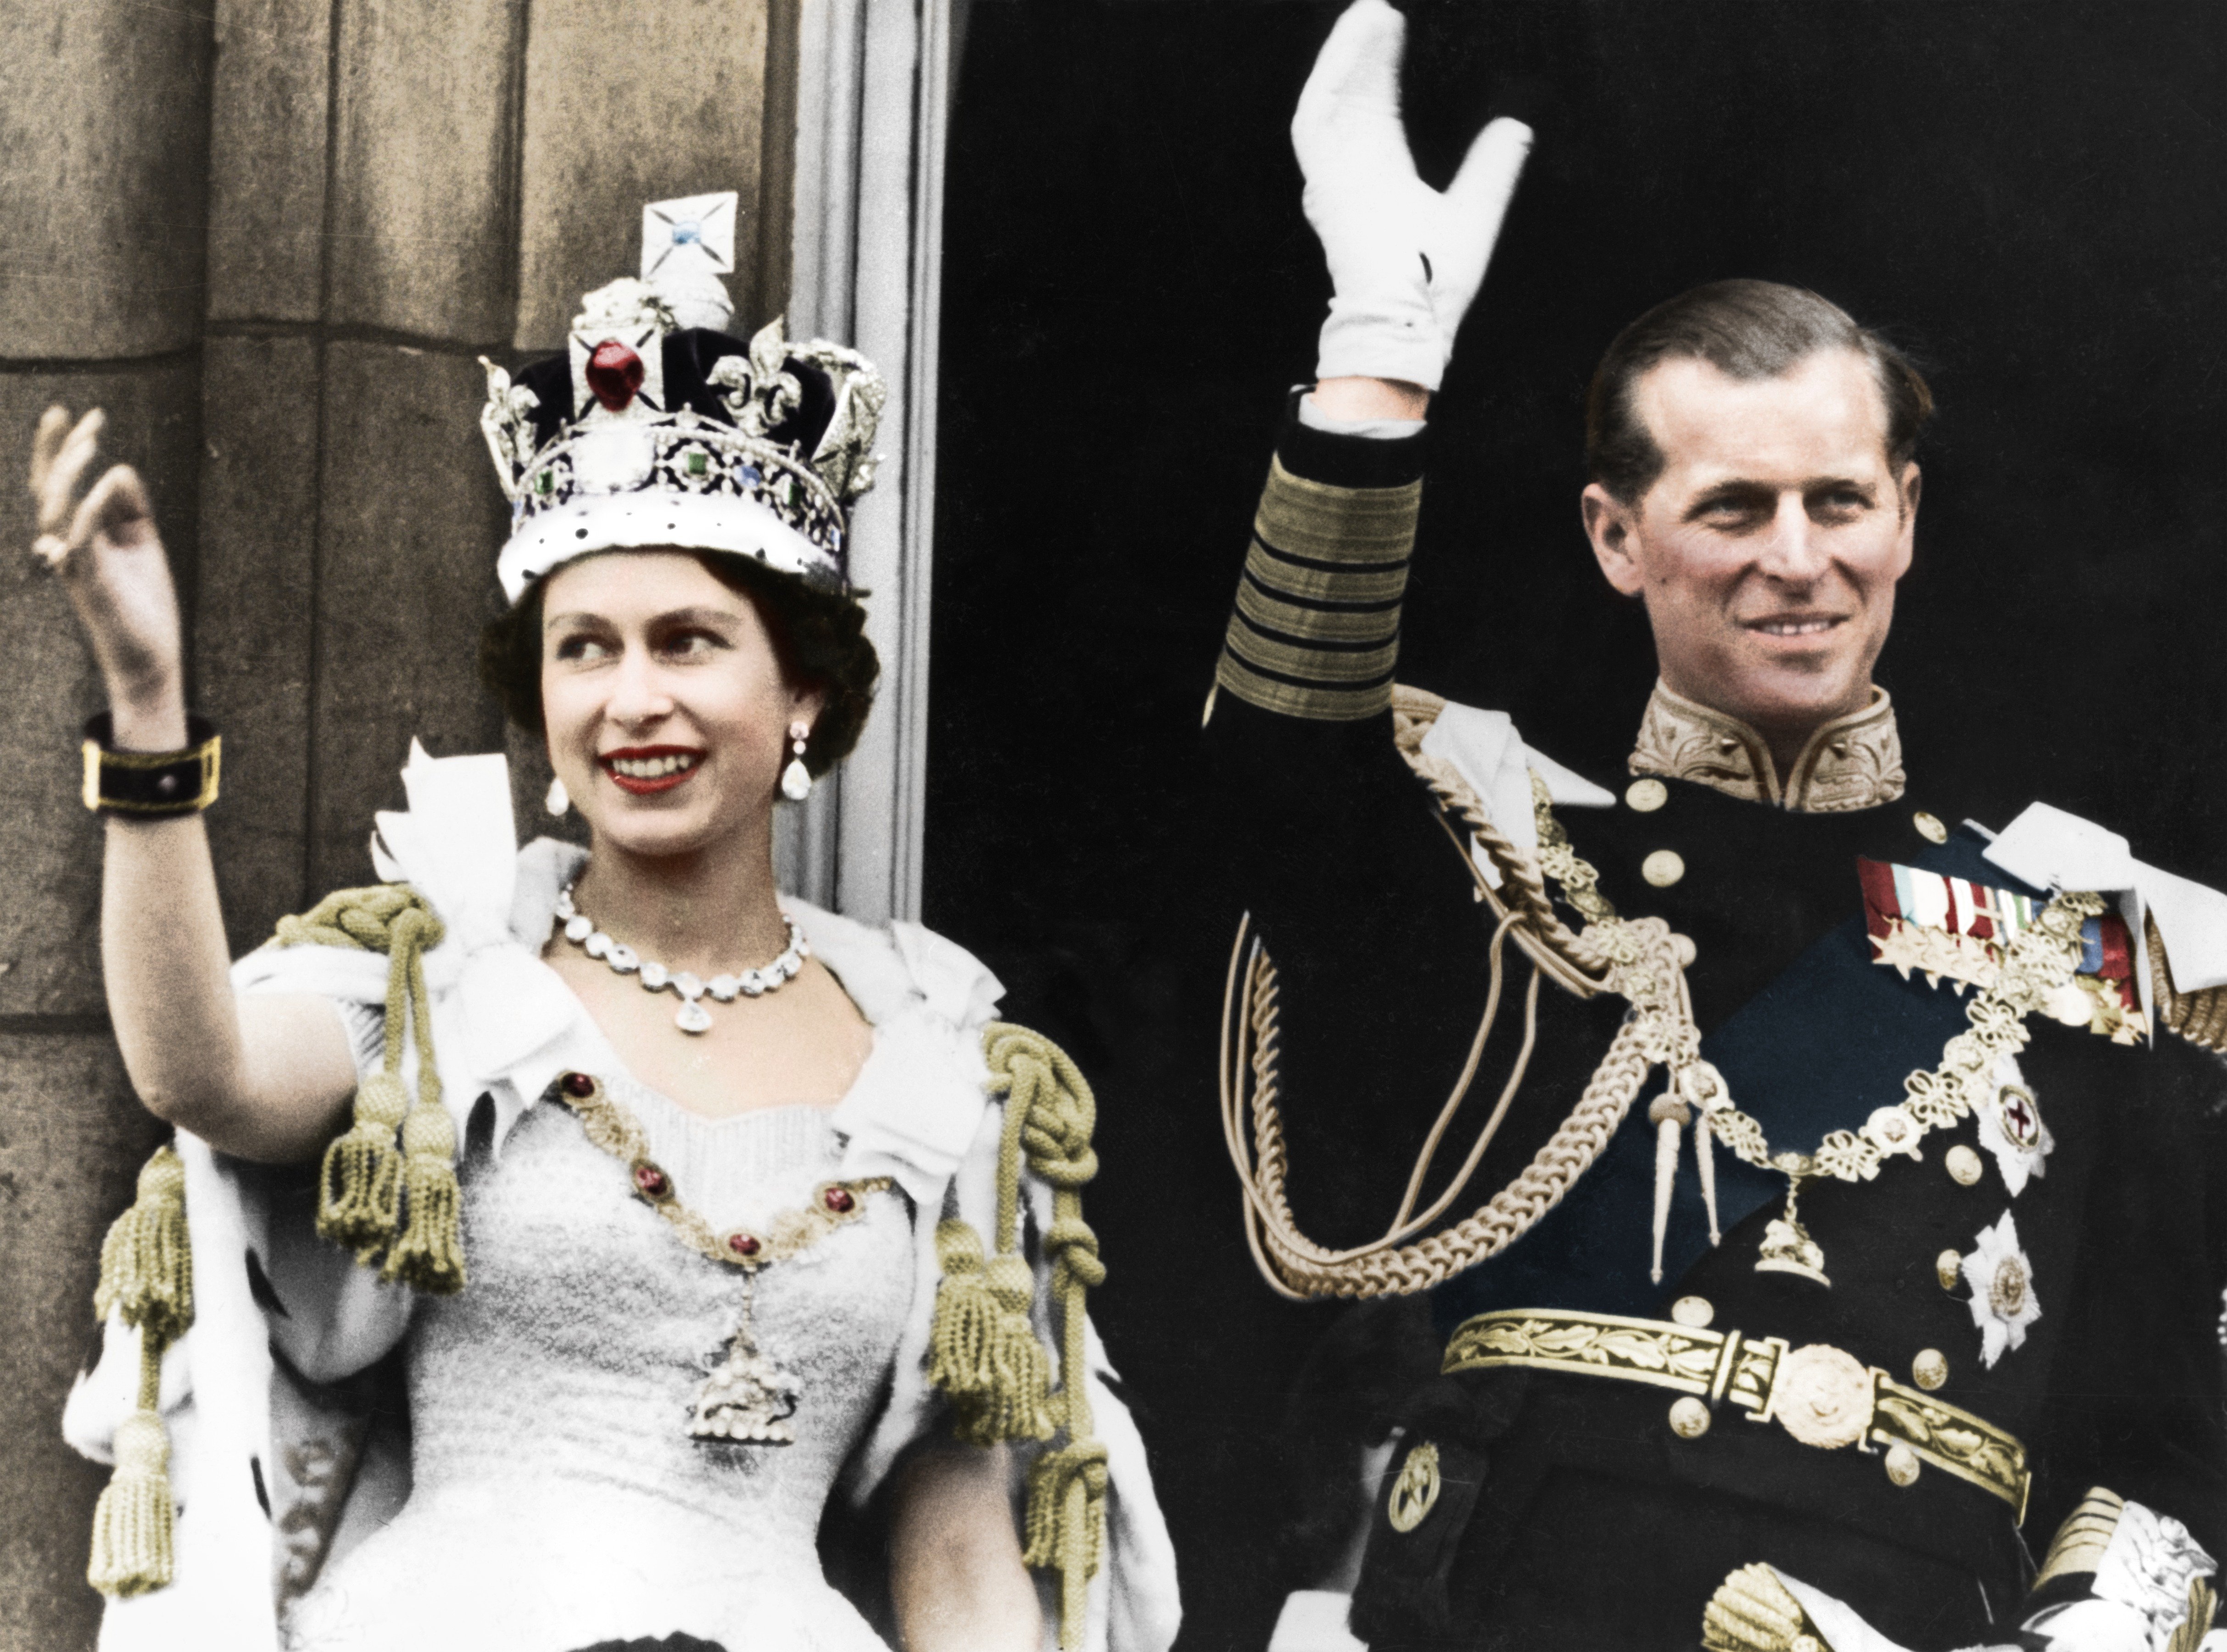 Queen Elizabeth II and the Duke of Edinburgh on the day of their coronation, Buckingham Palace, 1953 | Photo: Getty Images